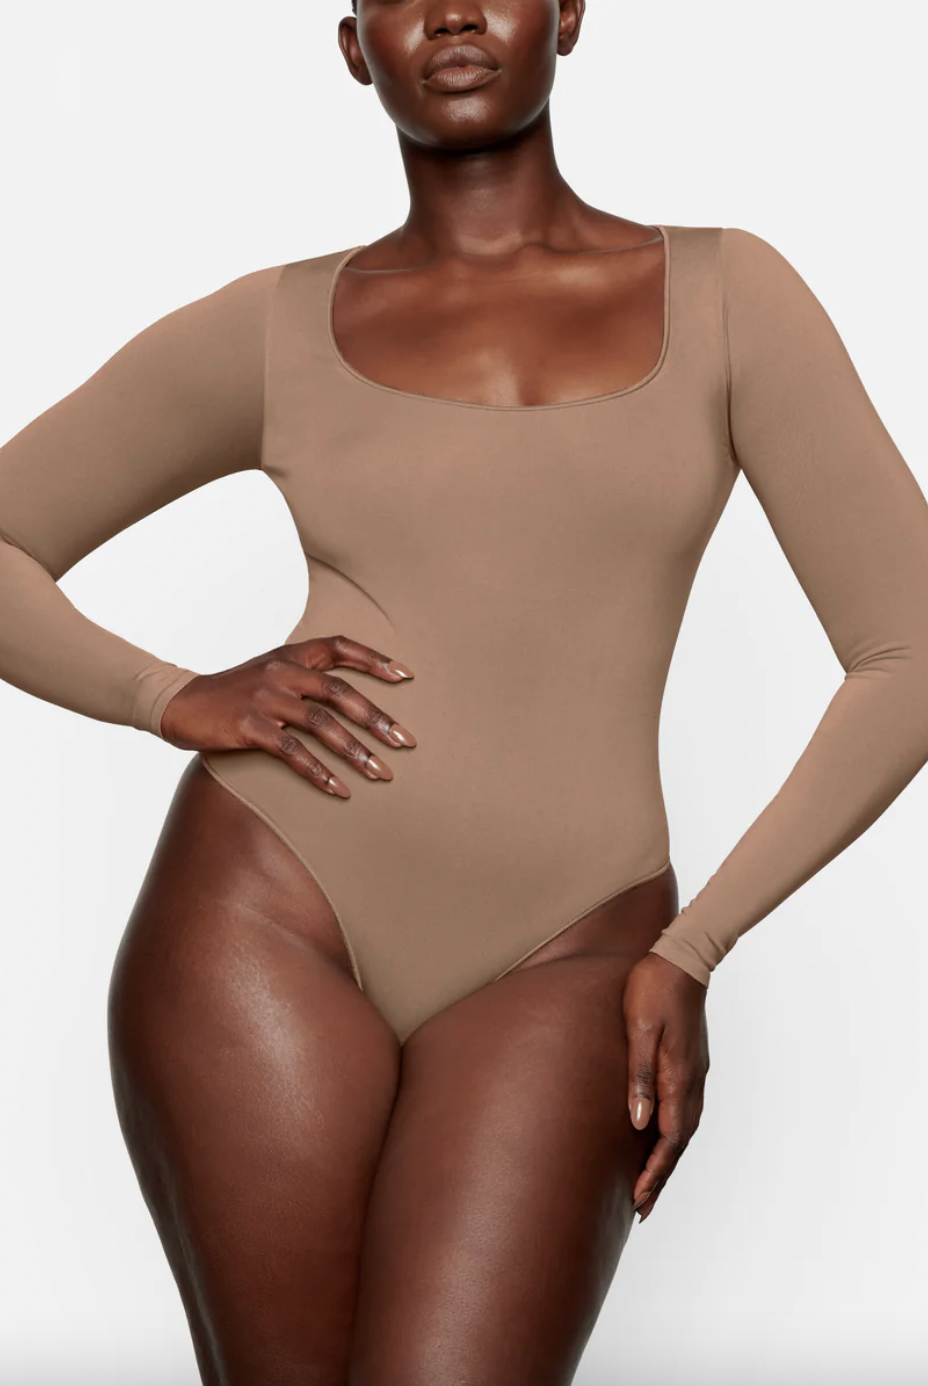 Skims Black Friday sale: Save on bodysuits, shapewear and more